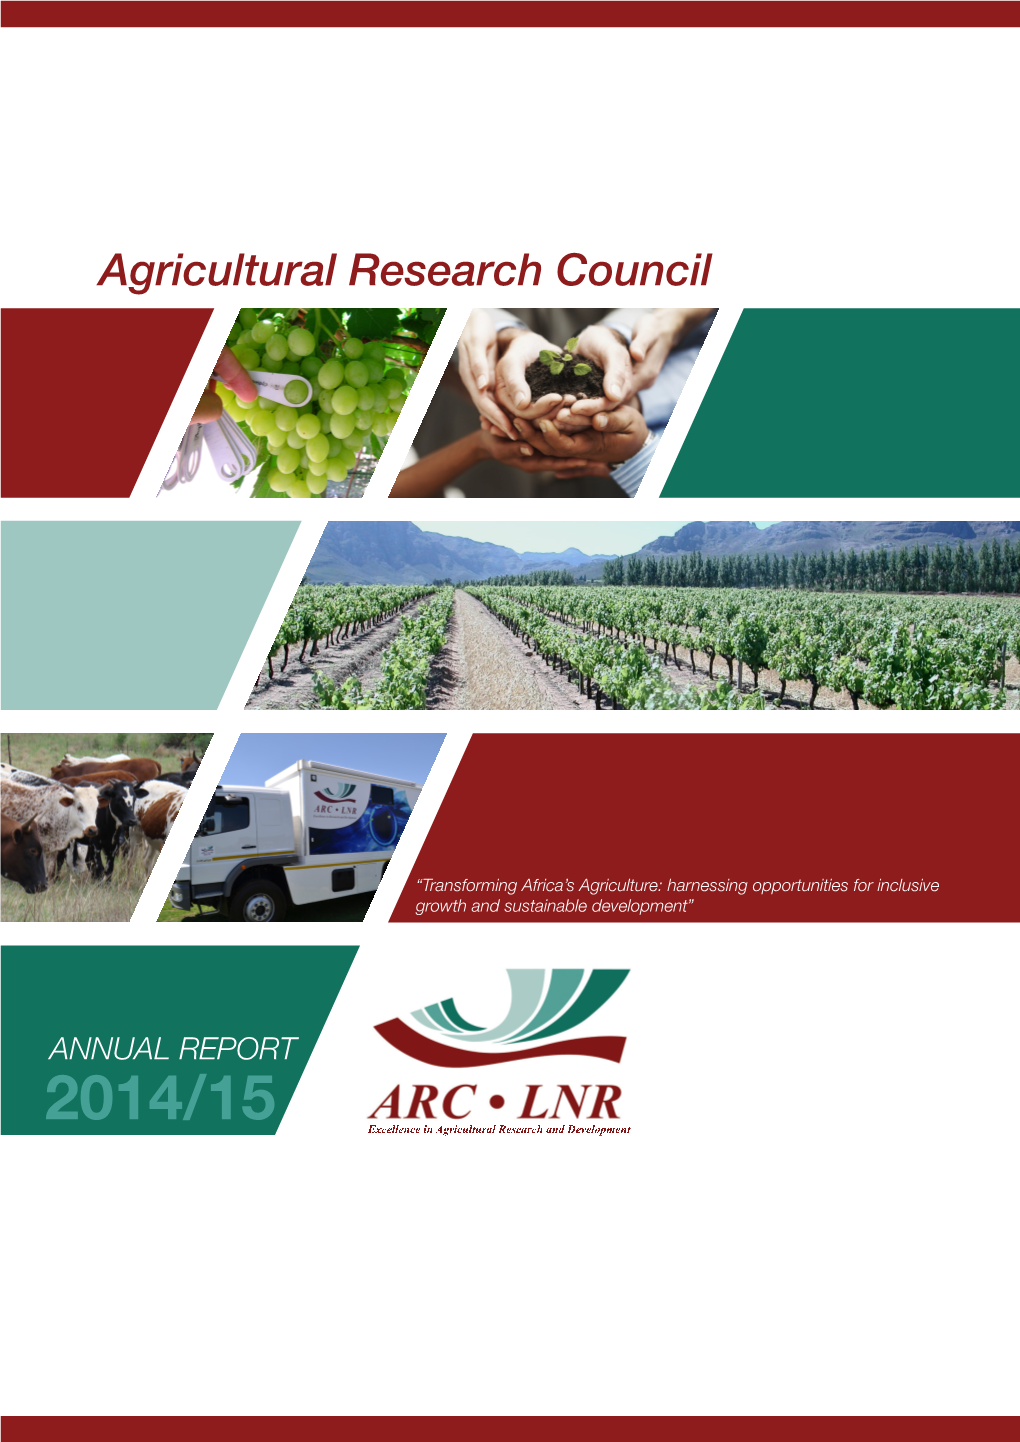 Agricultural Research Council 2014/15 Annual Report